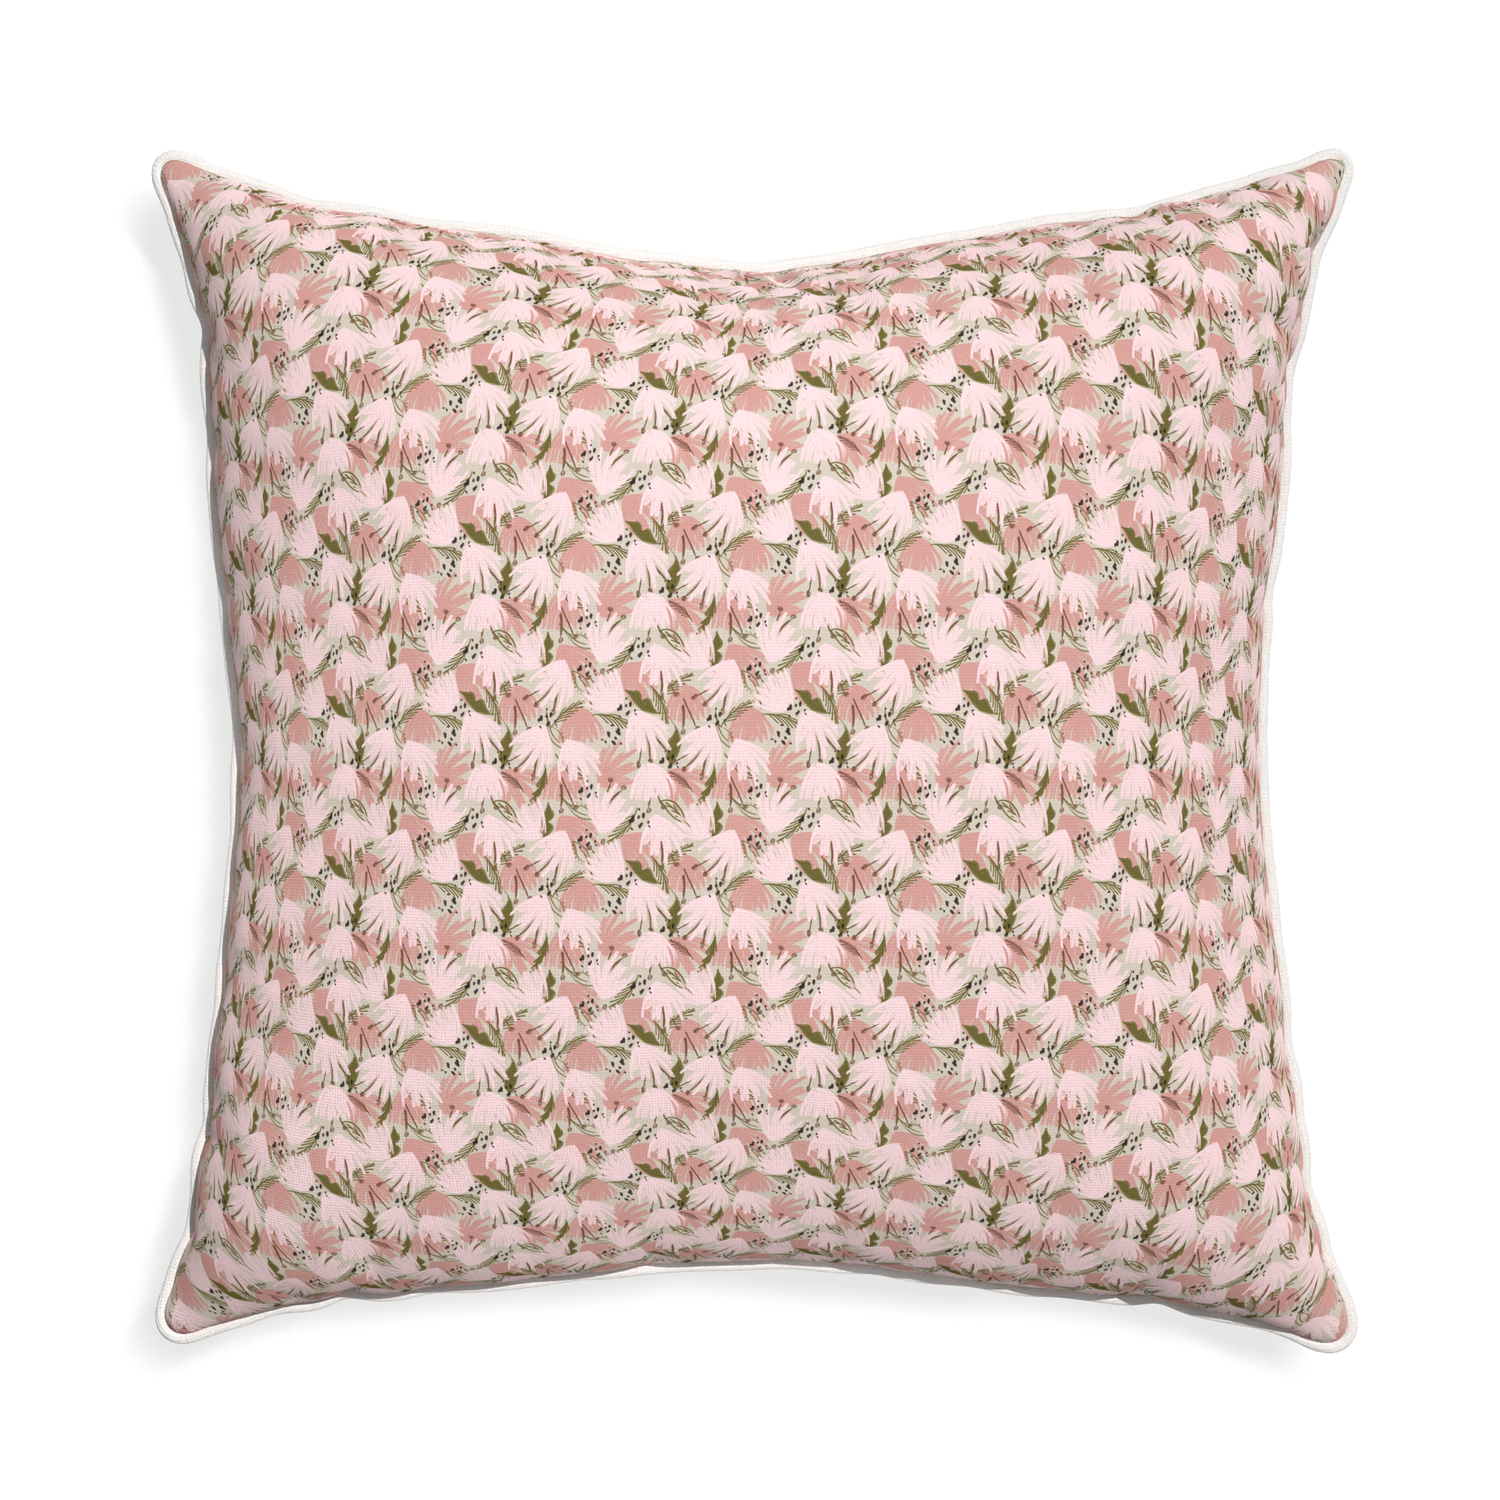 Euro-sham eden pink custom pink floralpillow with snow piping on white background